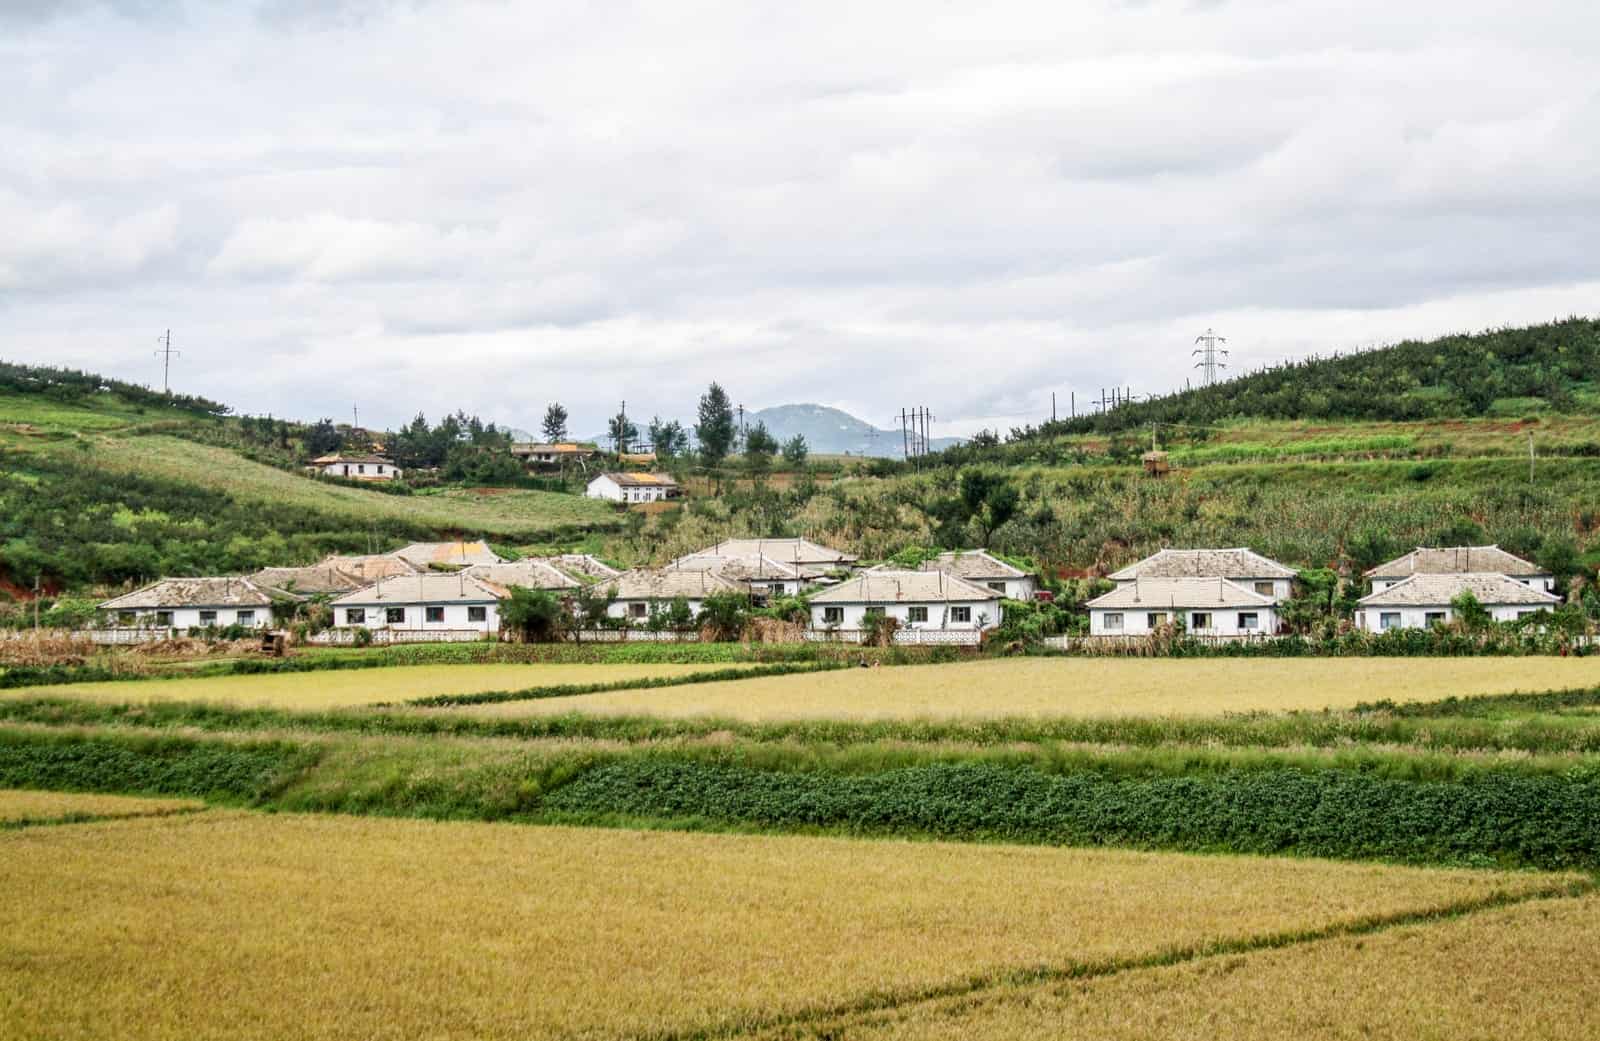 A working farm in North Korea - a side tourists get to see when they visit DPRK